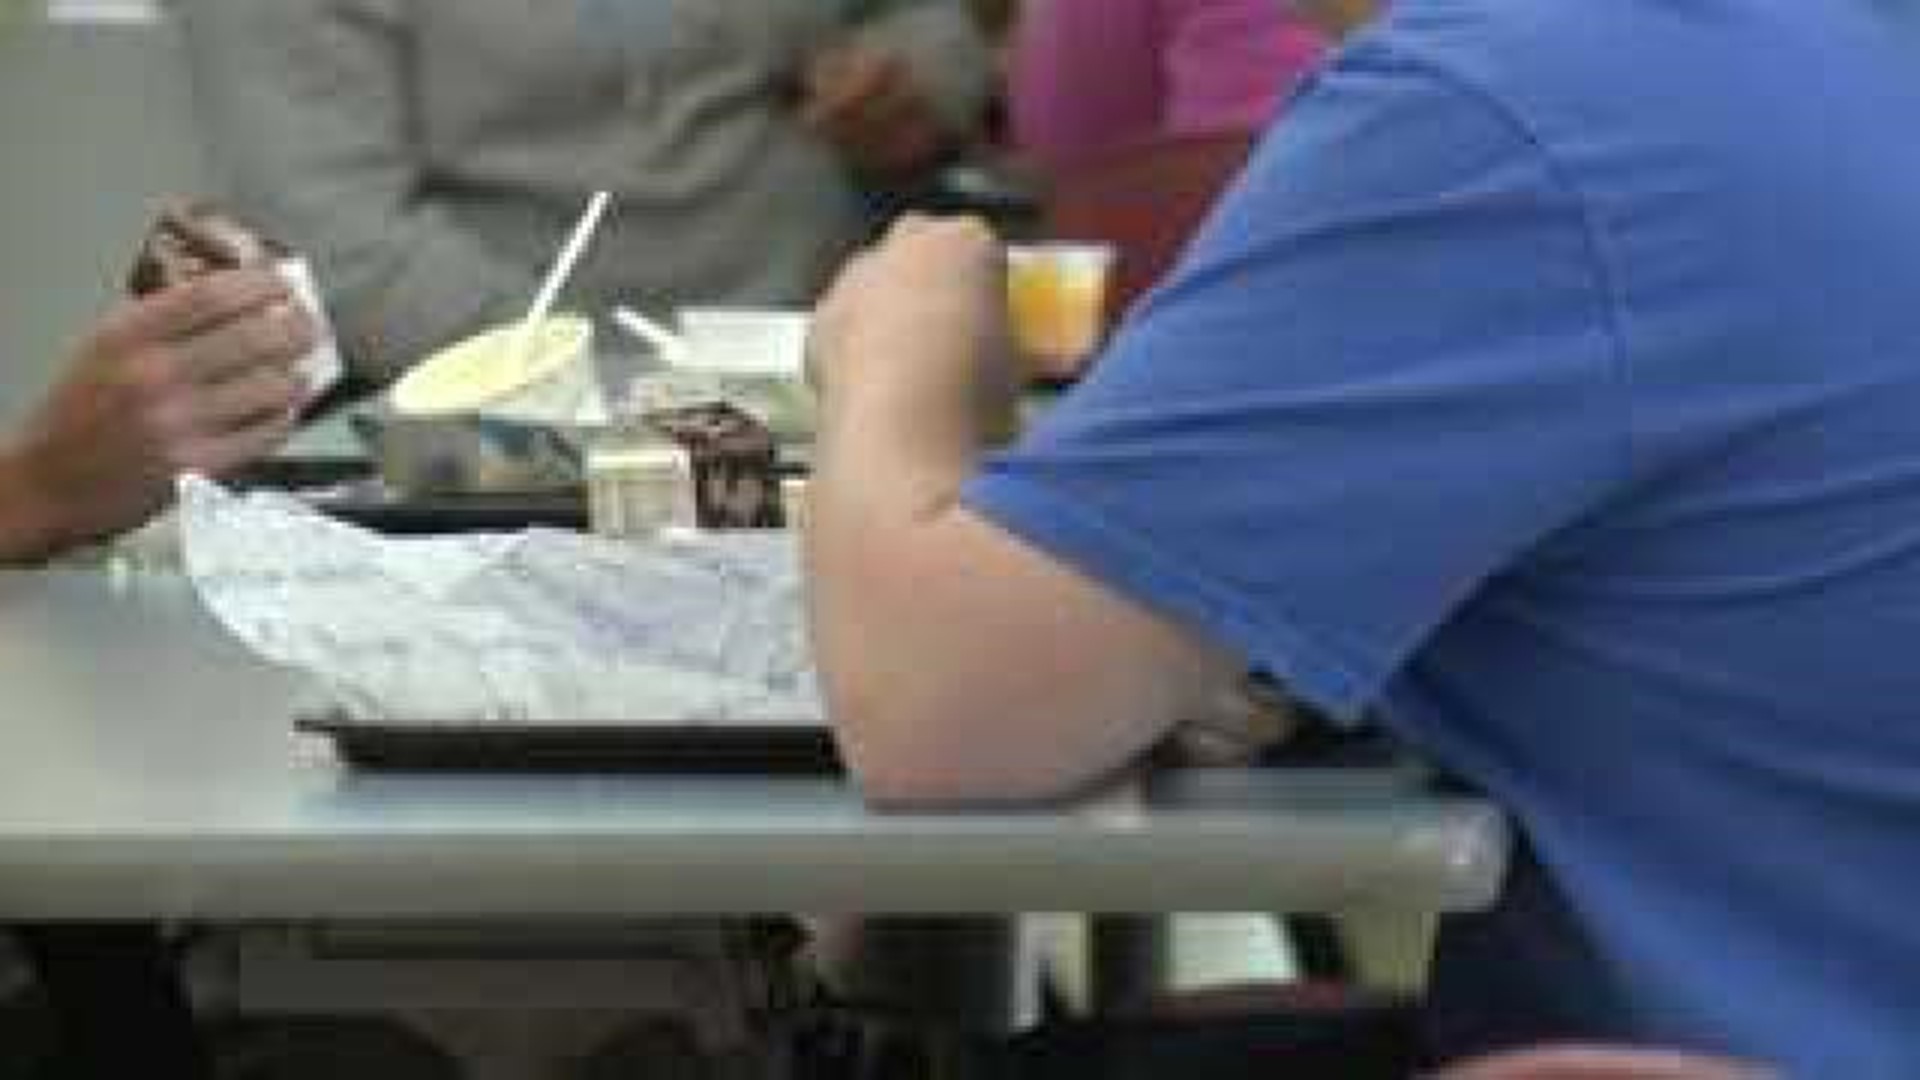 Cost of Davenport school lunches could go up